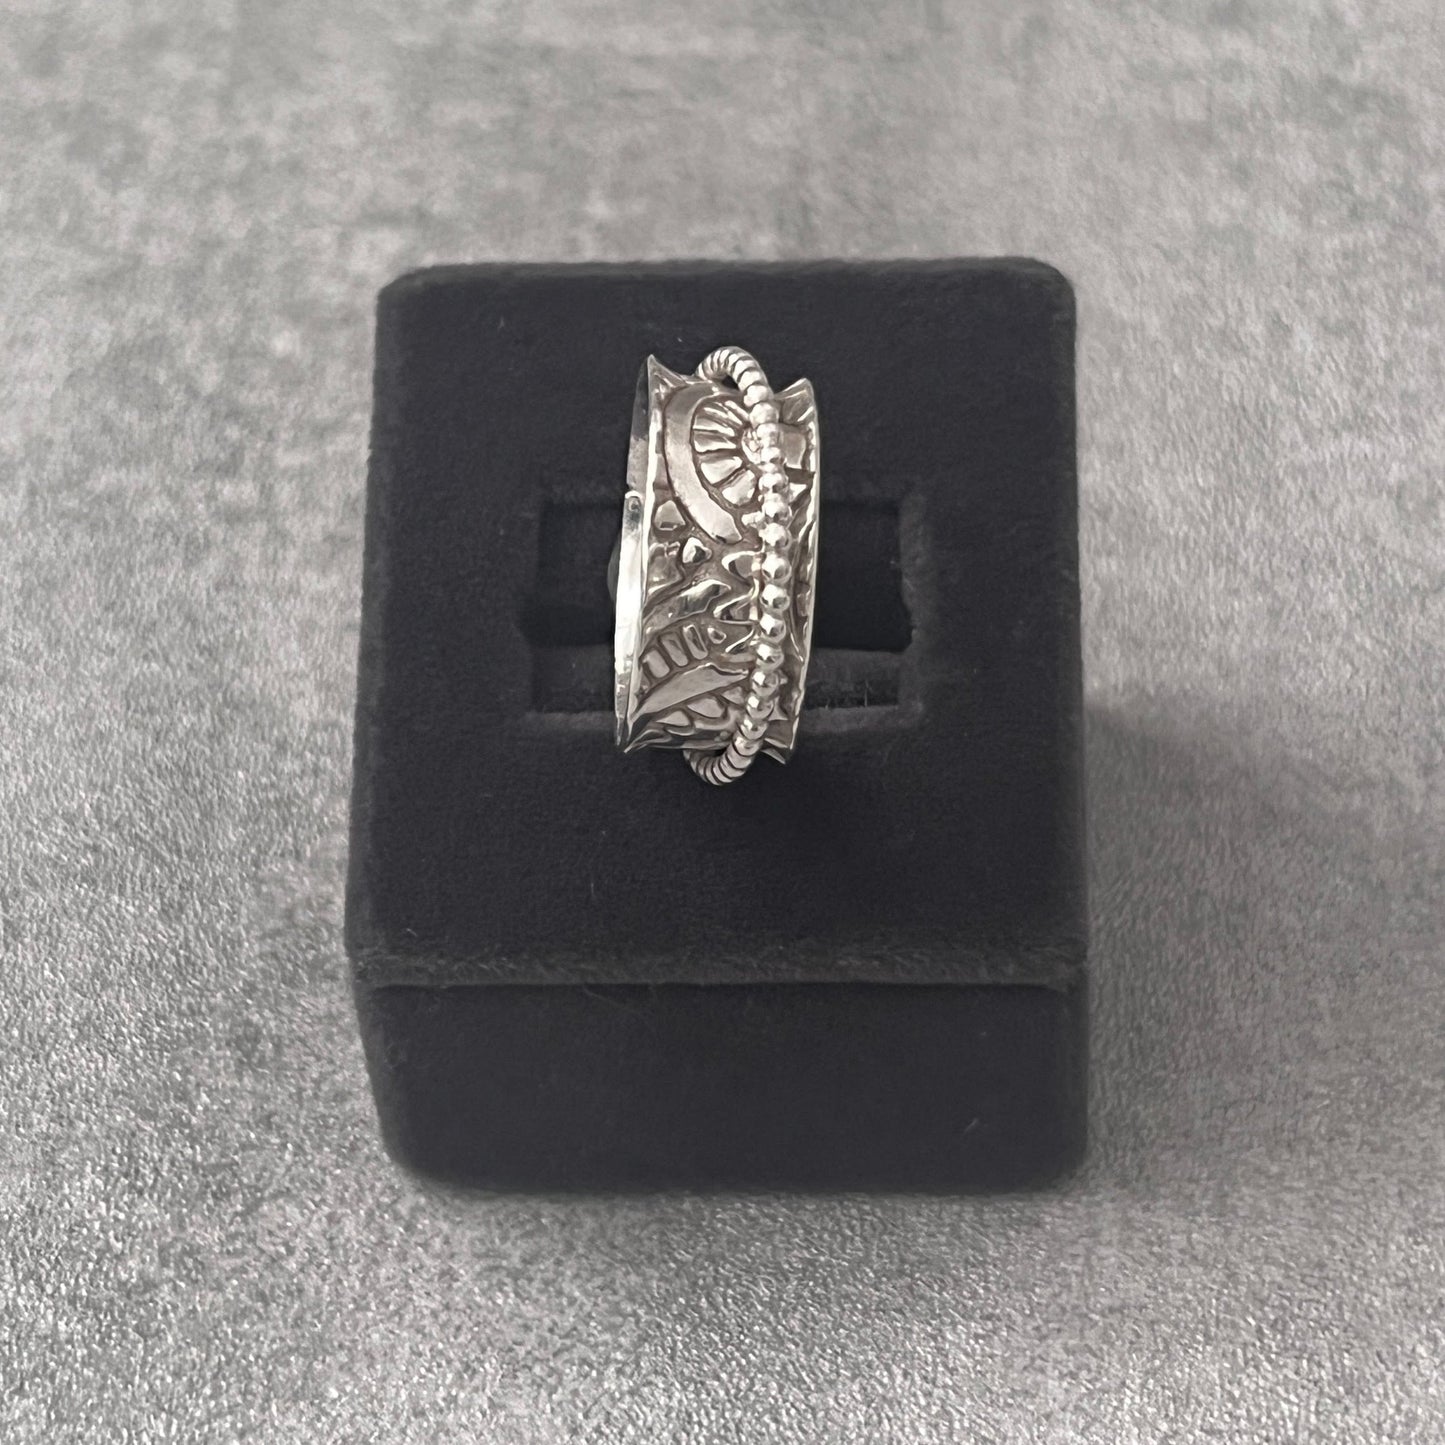 stg silver spinner ring one thick band 8mm wide with an imprinted paisley pattern. Over it spins a silver beaded thin ring 1.5mm wide. The outer ring spins with your touch